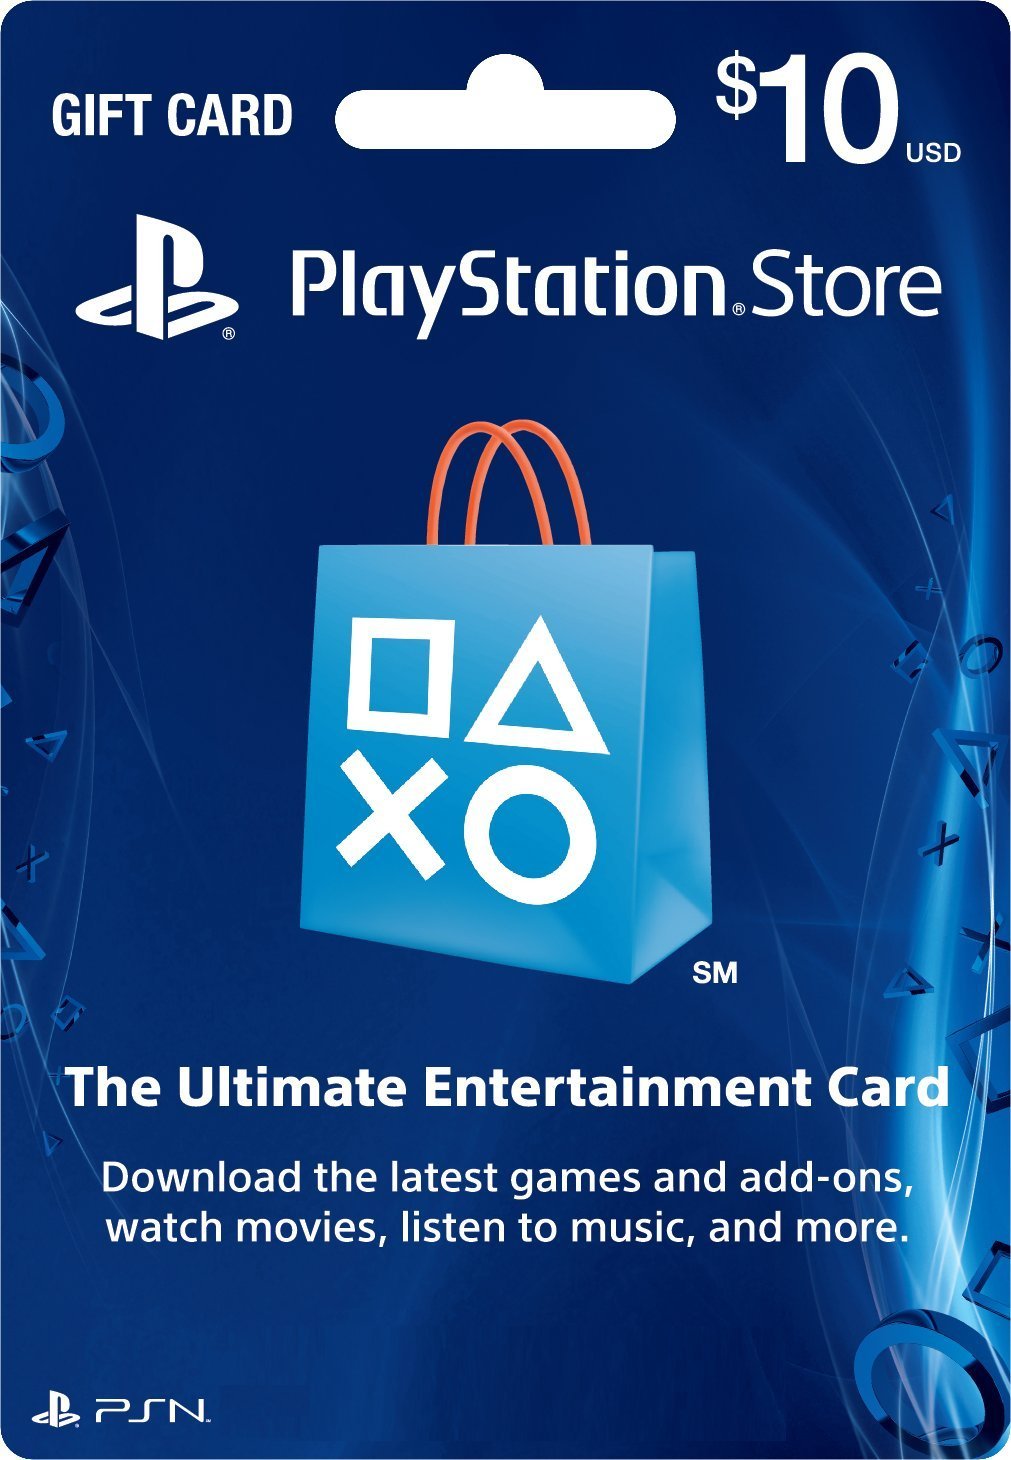 PSN Gift Card Code USA $ 10 for the PS4, PS3, PS Vita